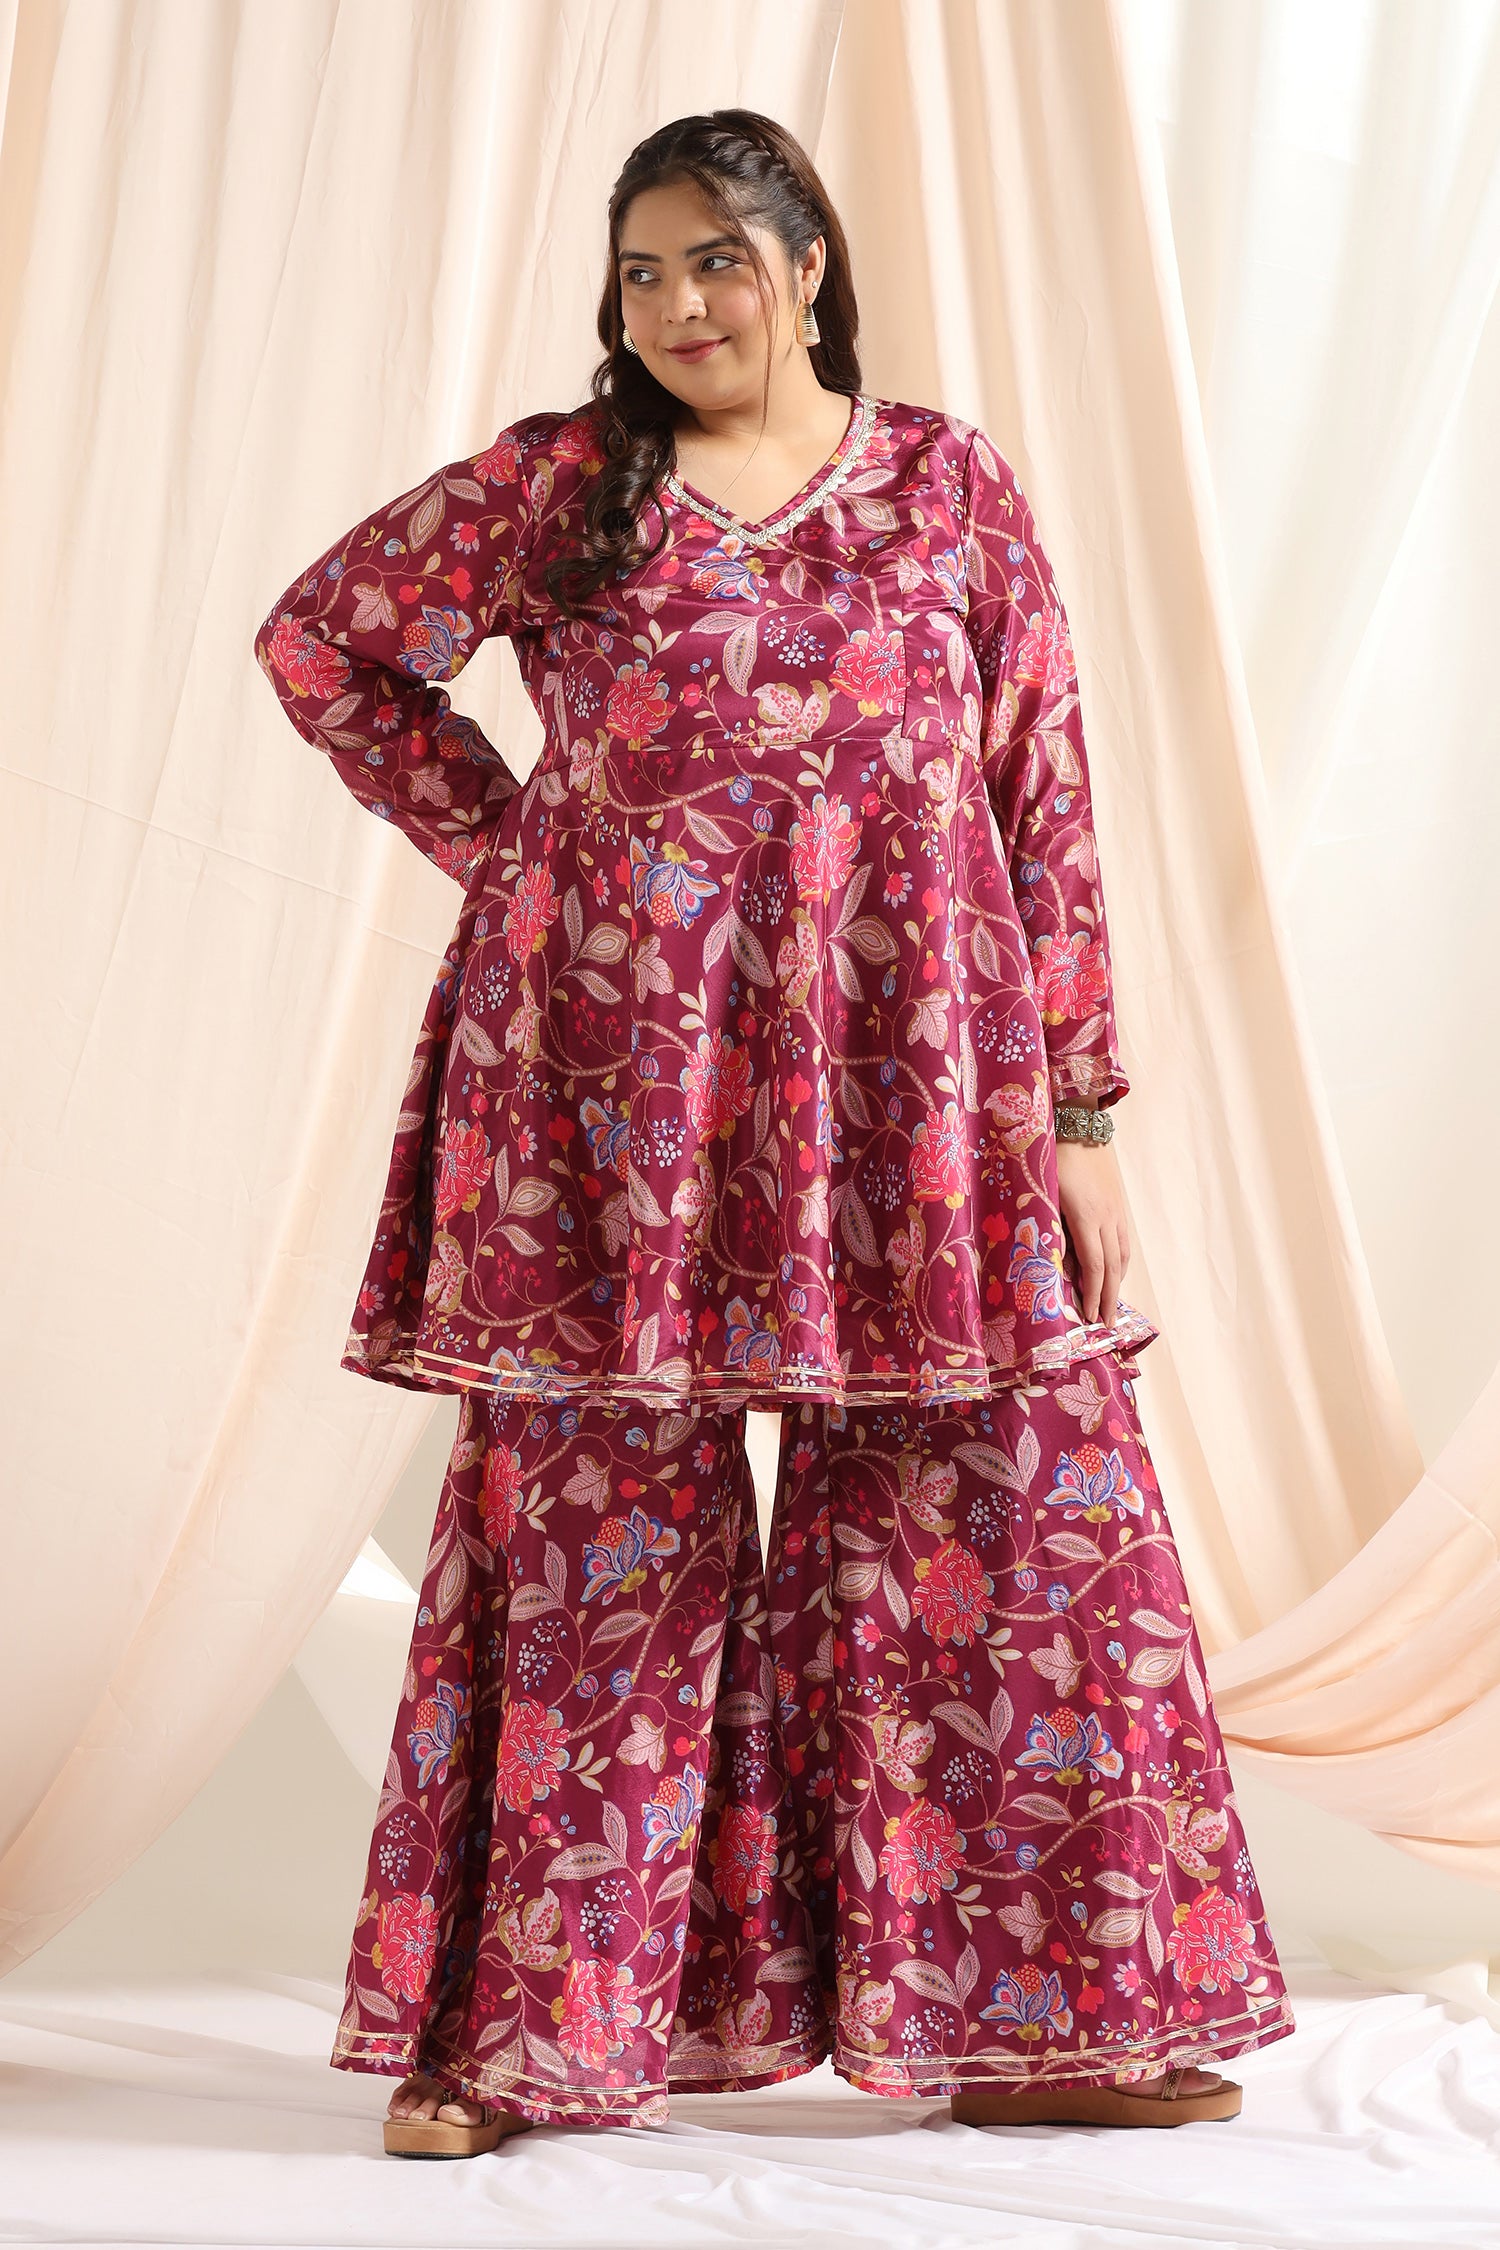 Plus Size Clothing Store Online In India | Trendy Plus Size Clothes For Men  & Women